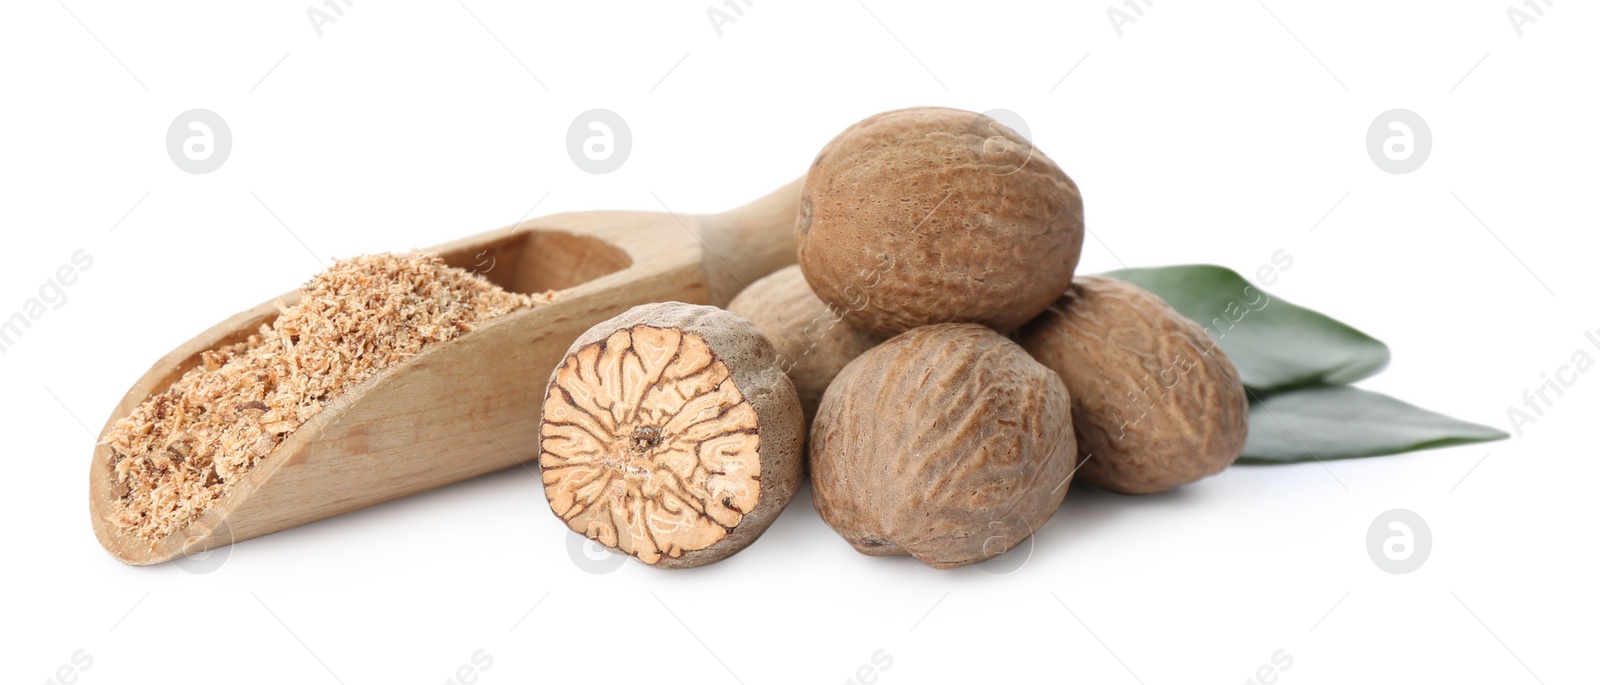 Photo of Grated nutmeg and seeds with green leaves on white background